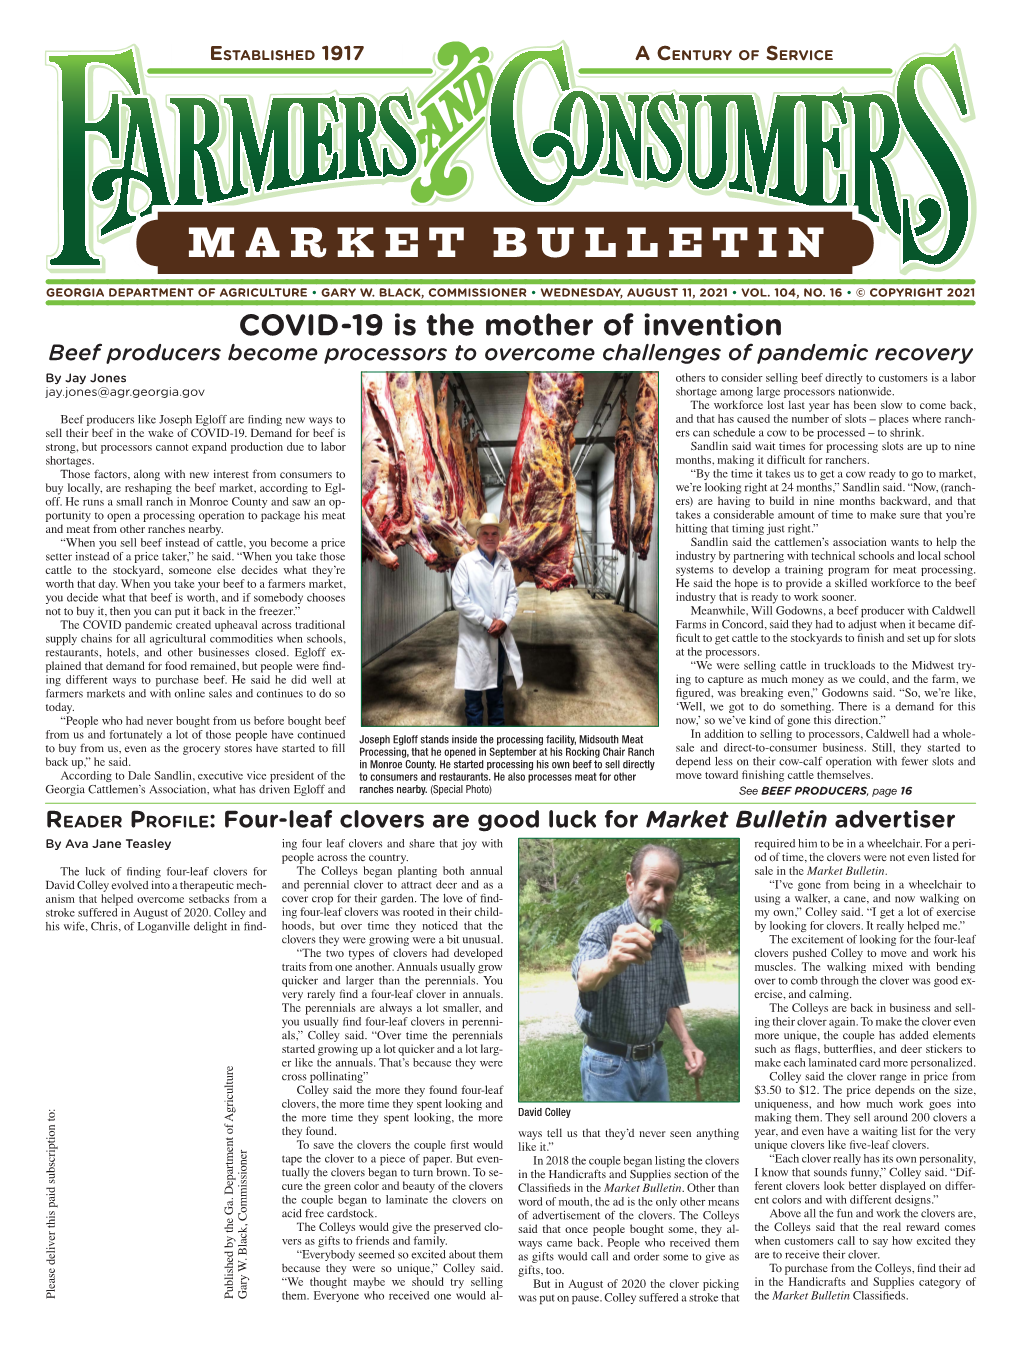 Market Bulletin Advertiser by Ava Jane Teasley Ing Four Leaf Clovers and Share That Joy with Required Him to Be in a Wheelchair